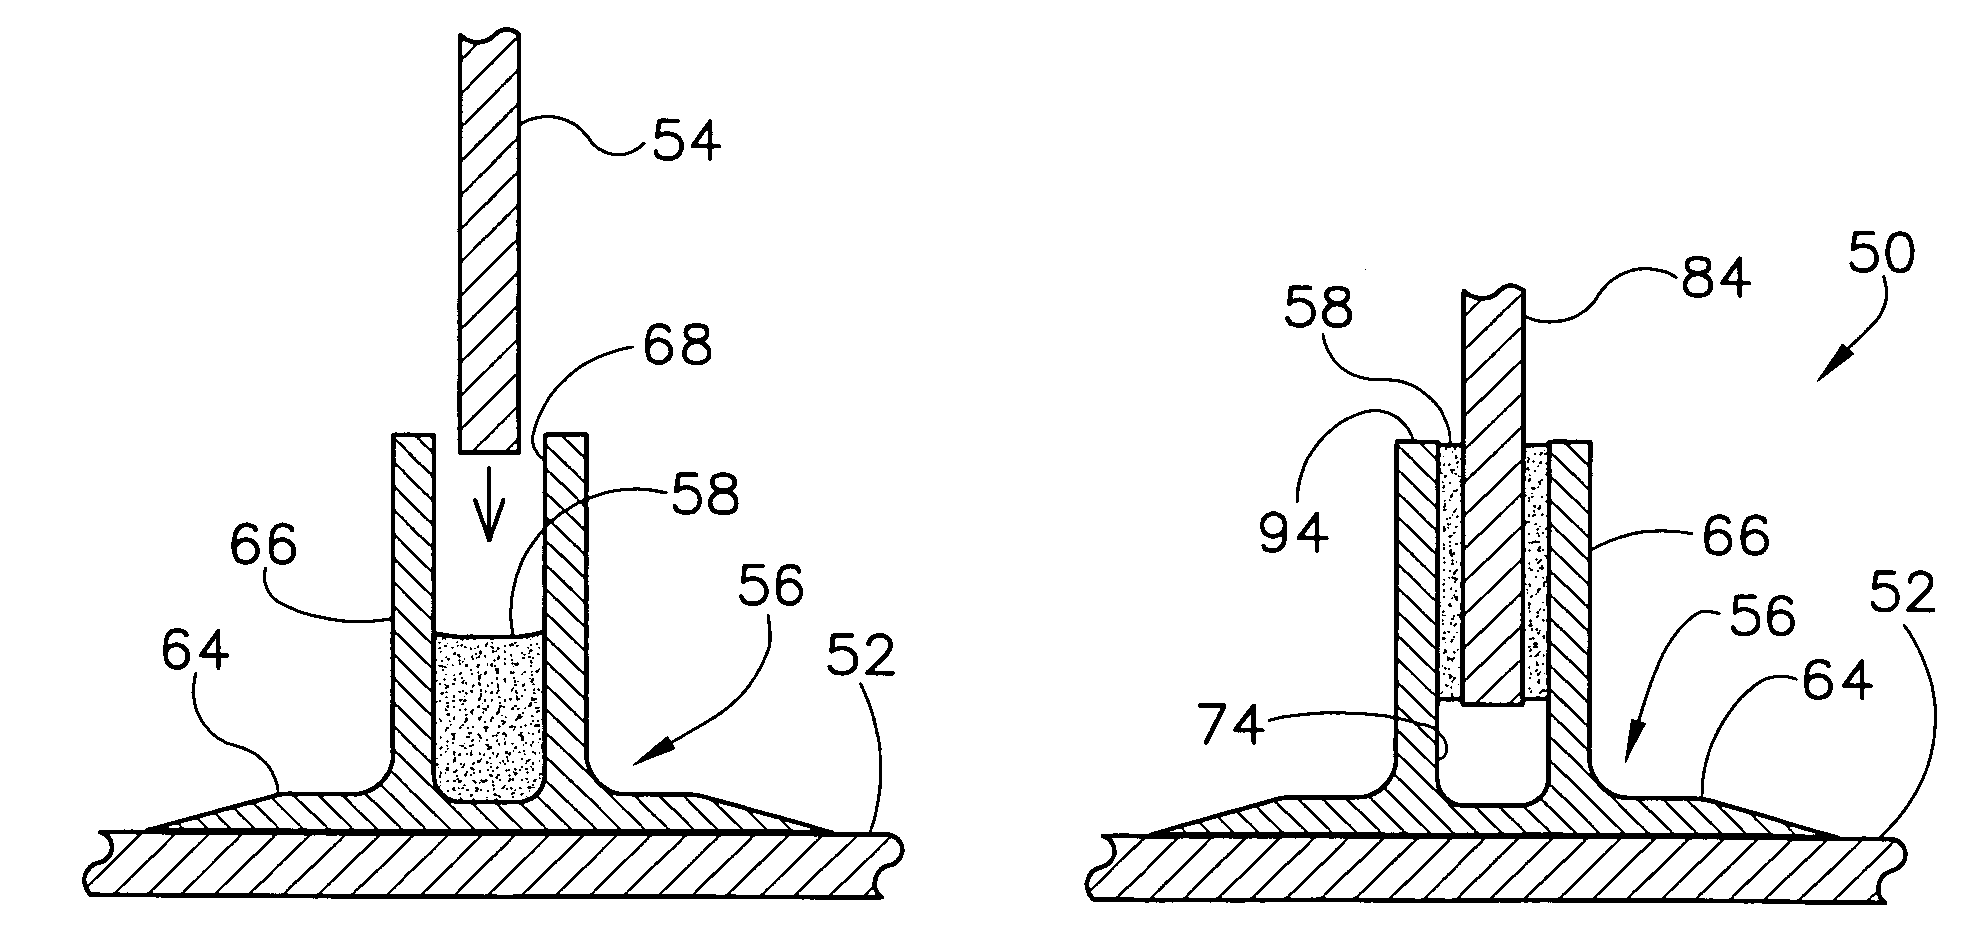 Methods of joining structures and joints formed thereby